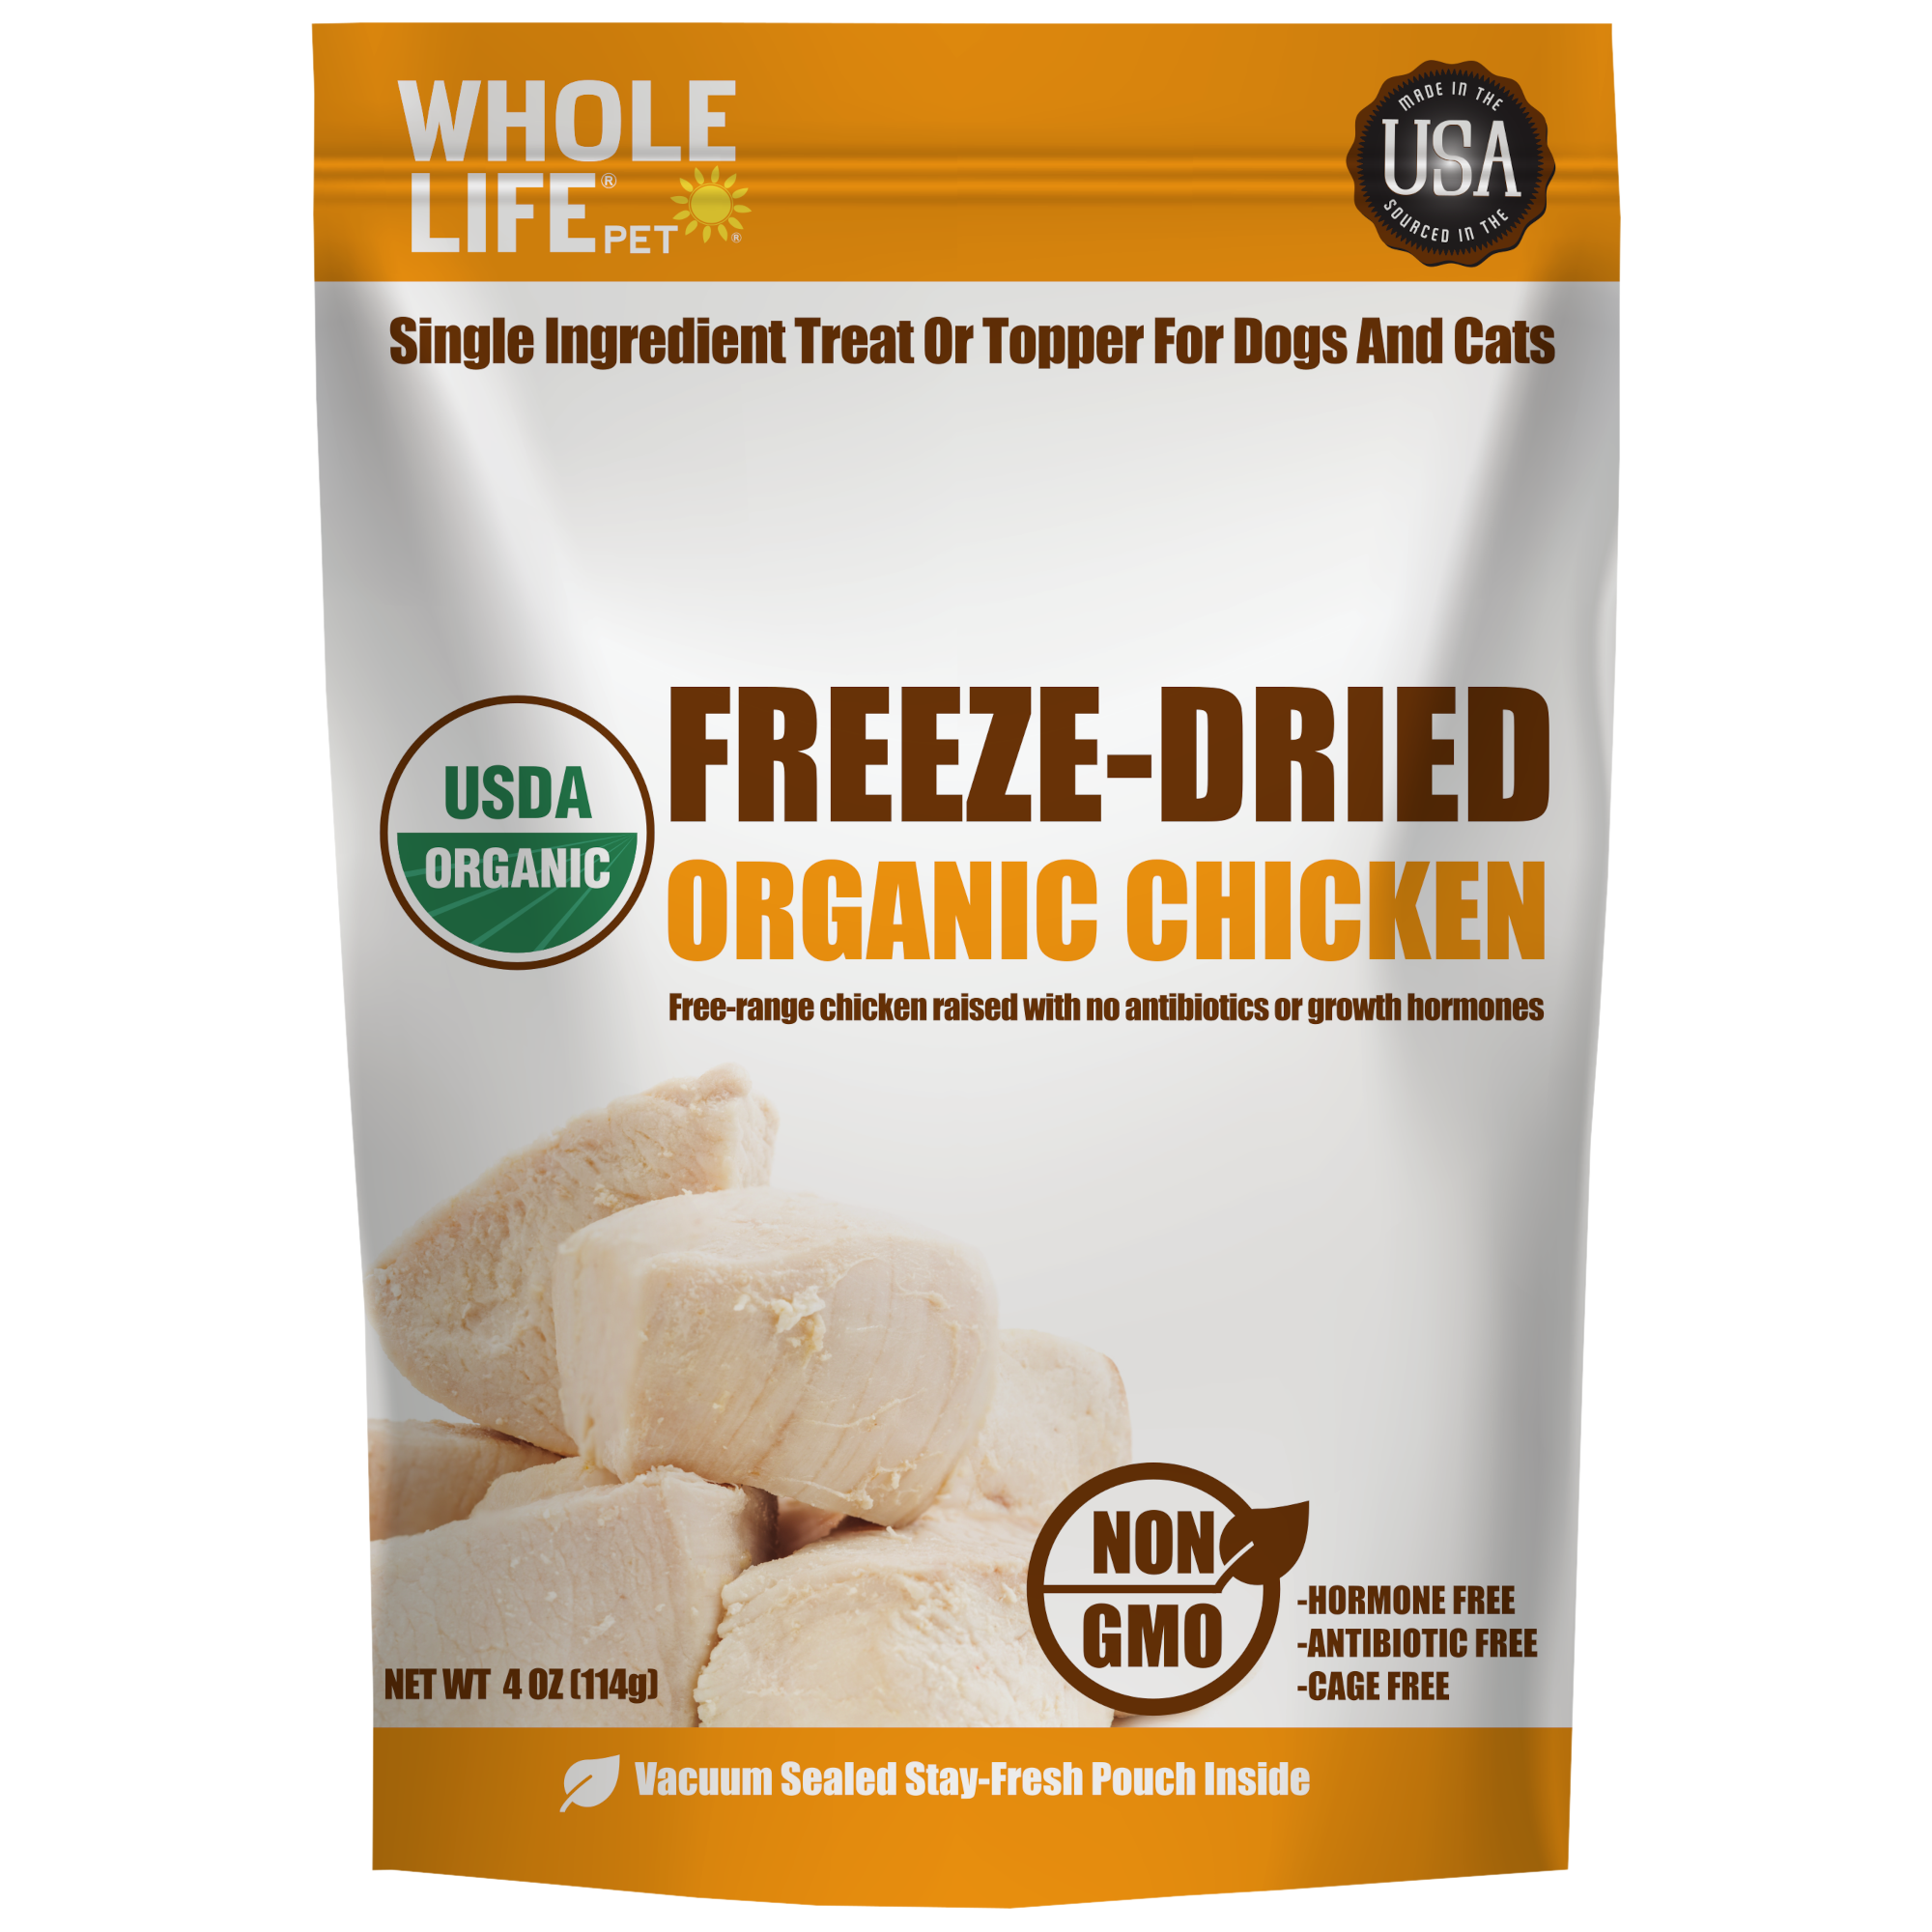 Organic Chicken Treats For Dogs – Whole Life Pet